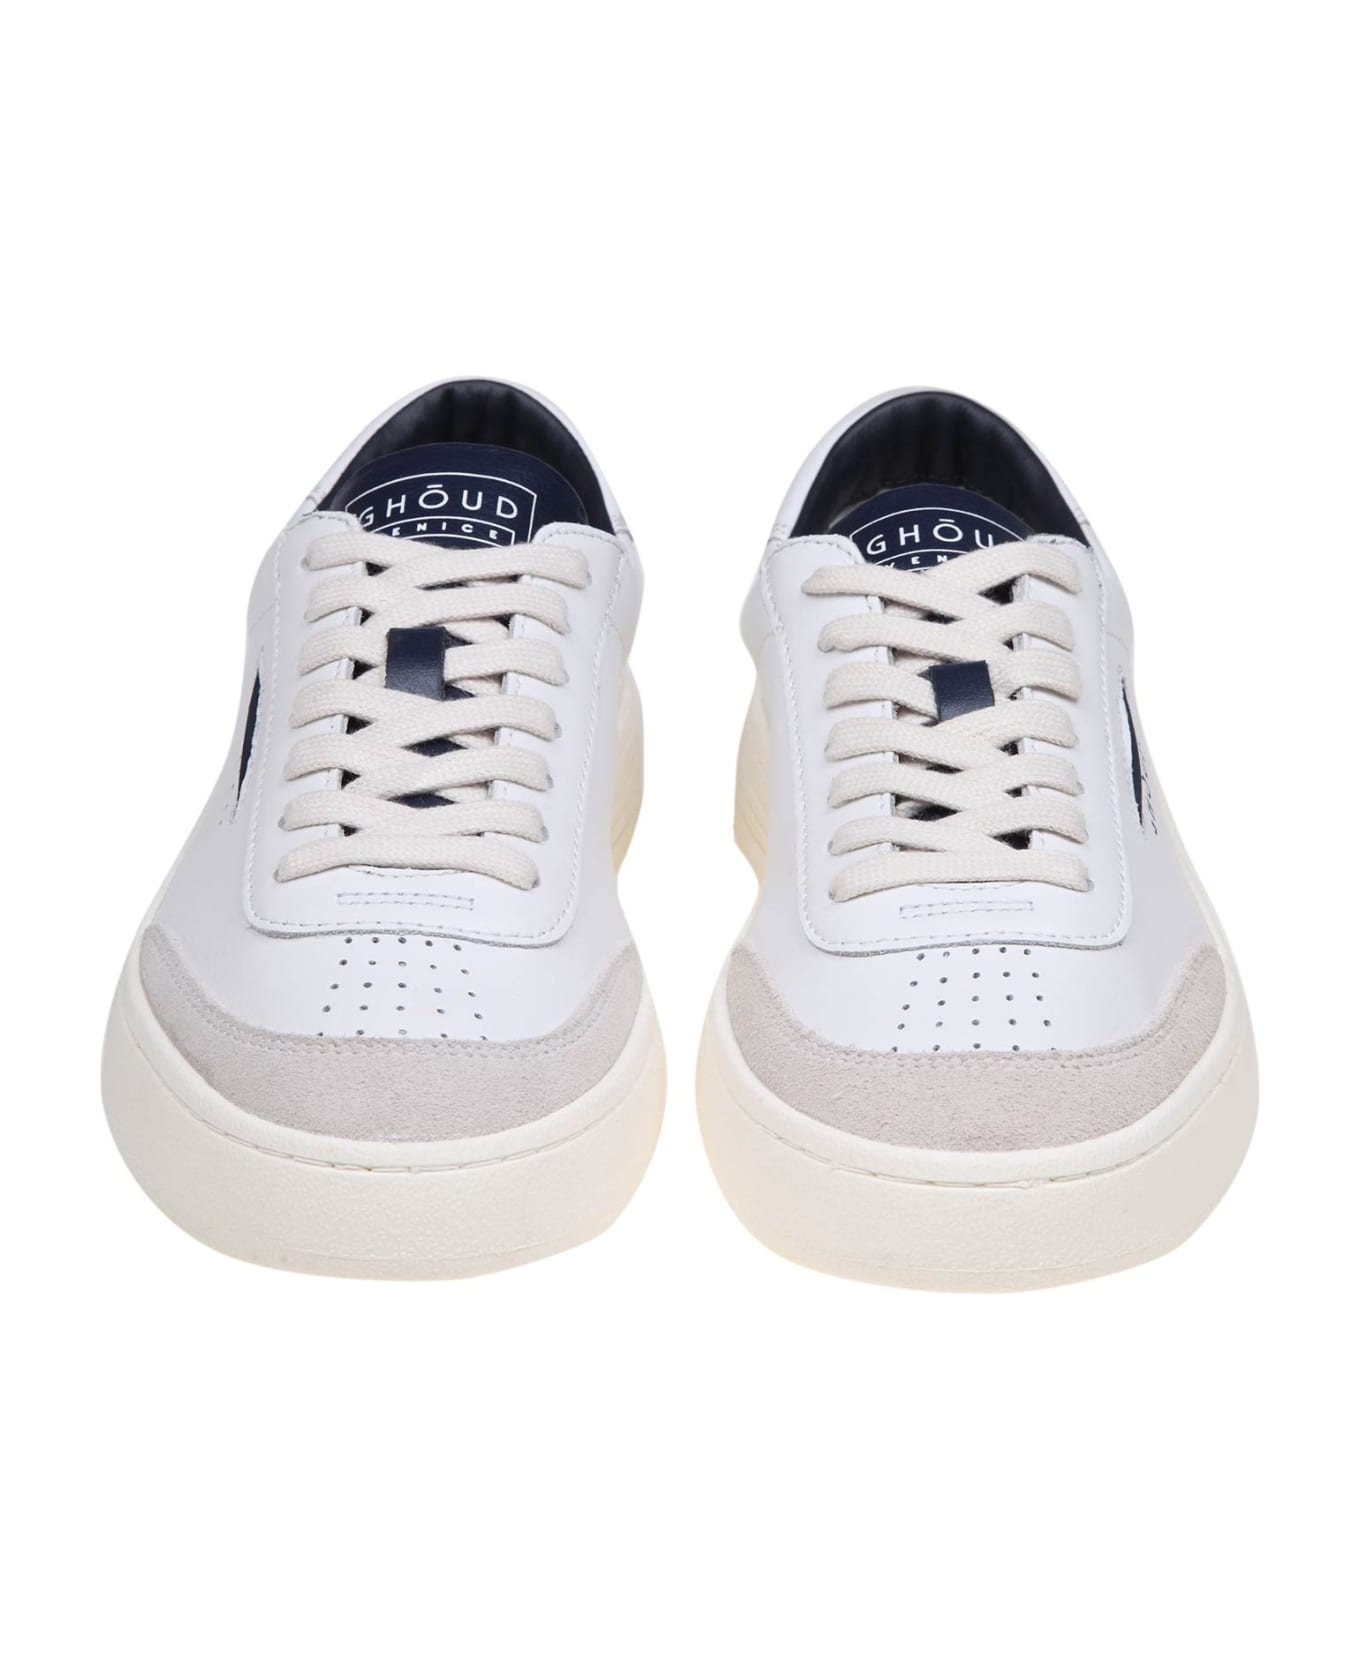 GHOUD Lido Low Sneakers In White/blue Leather And Suede - Blue スニーカー